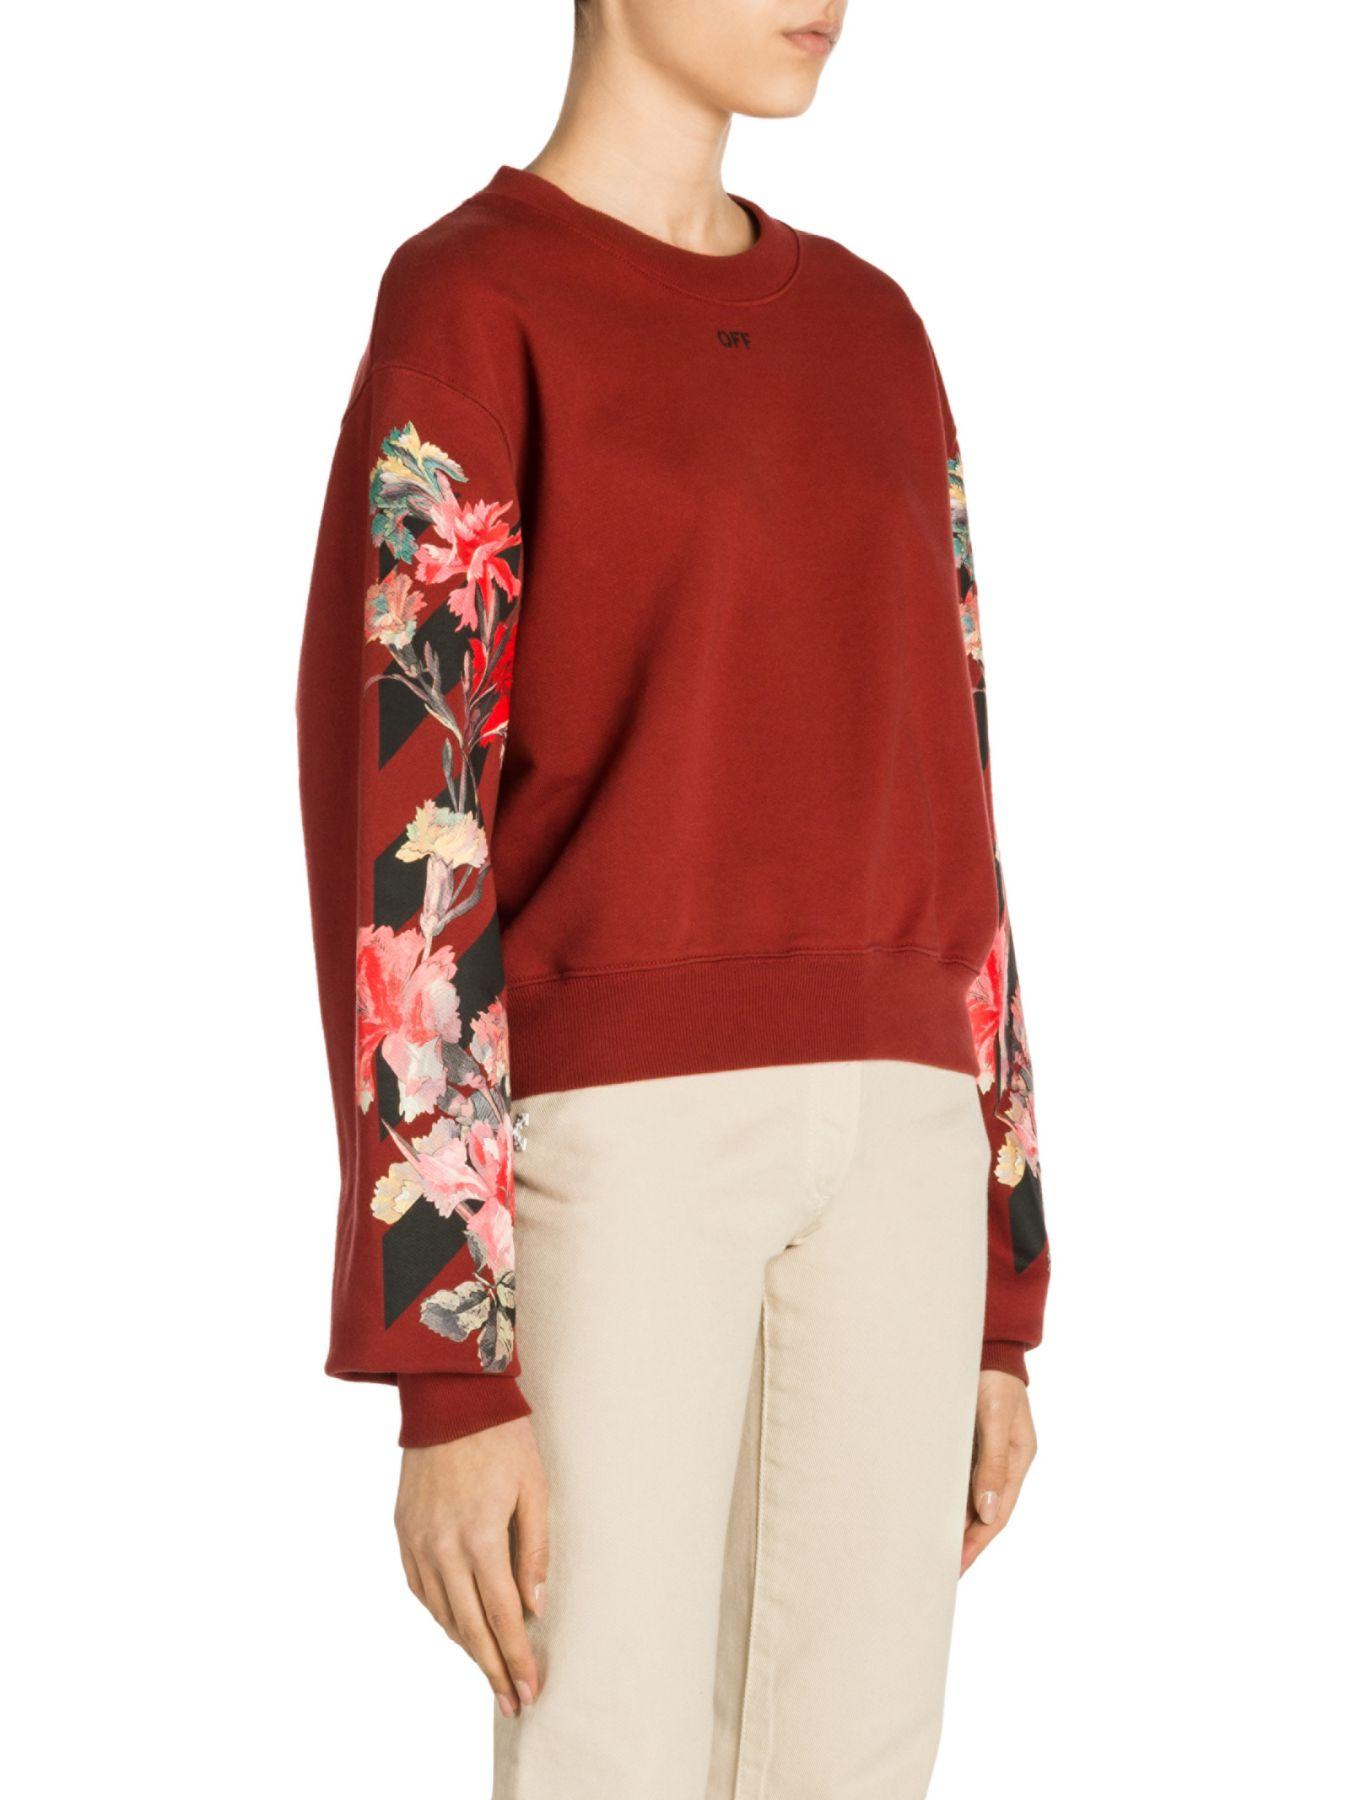 Off-White c/o Virgil Abloh Flowers Carryover Cropped Crewneck Sweatshirt in  Red | Lyst